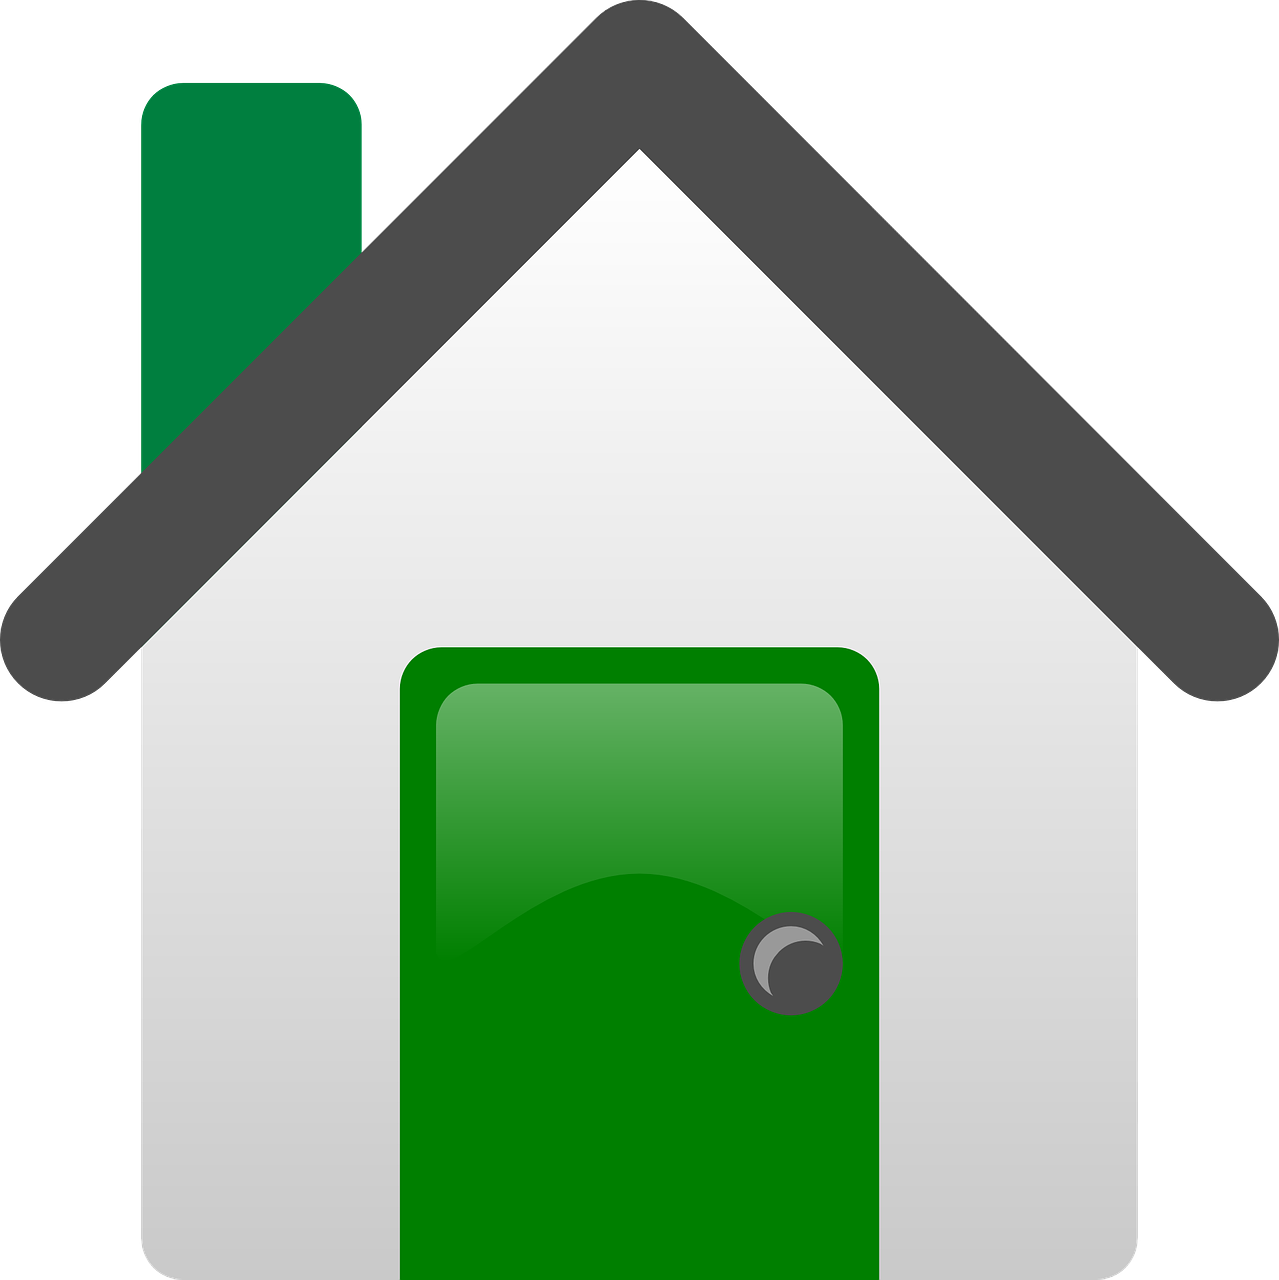 House Door Green Home Entrance Png Image - House Clip Art (1279x1280)